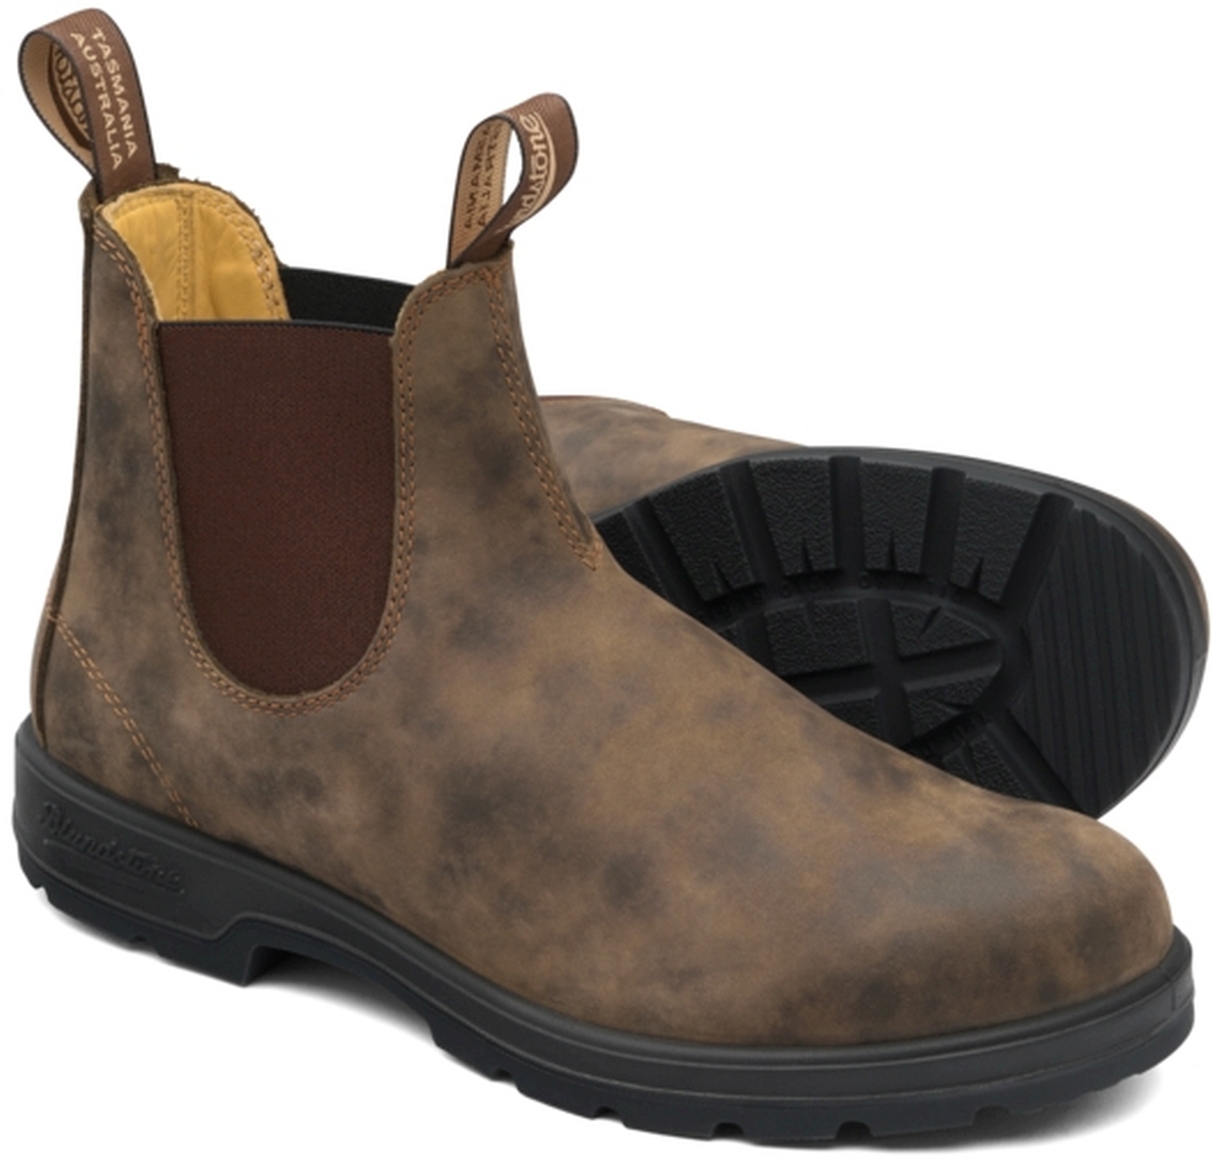 Blundstone Blundstone 585 Rustic Brown Leather (550 Series) Calf leather